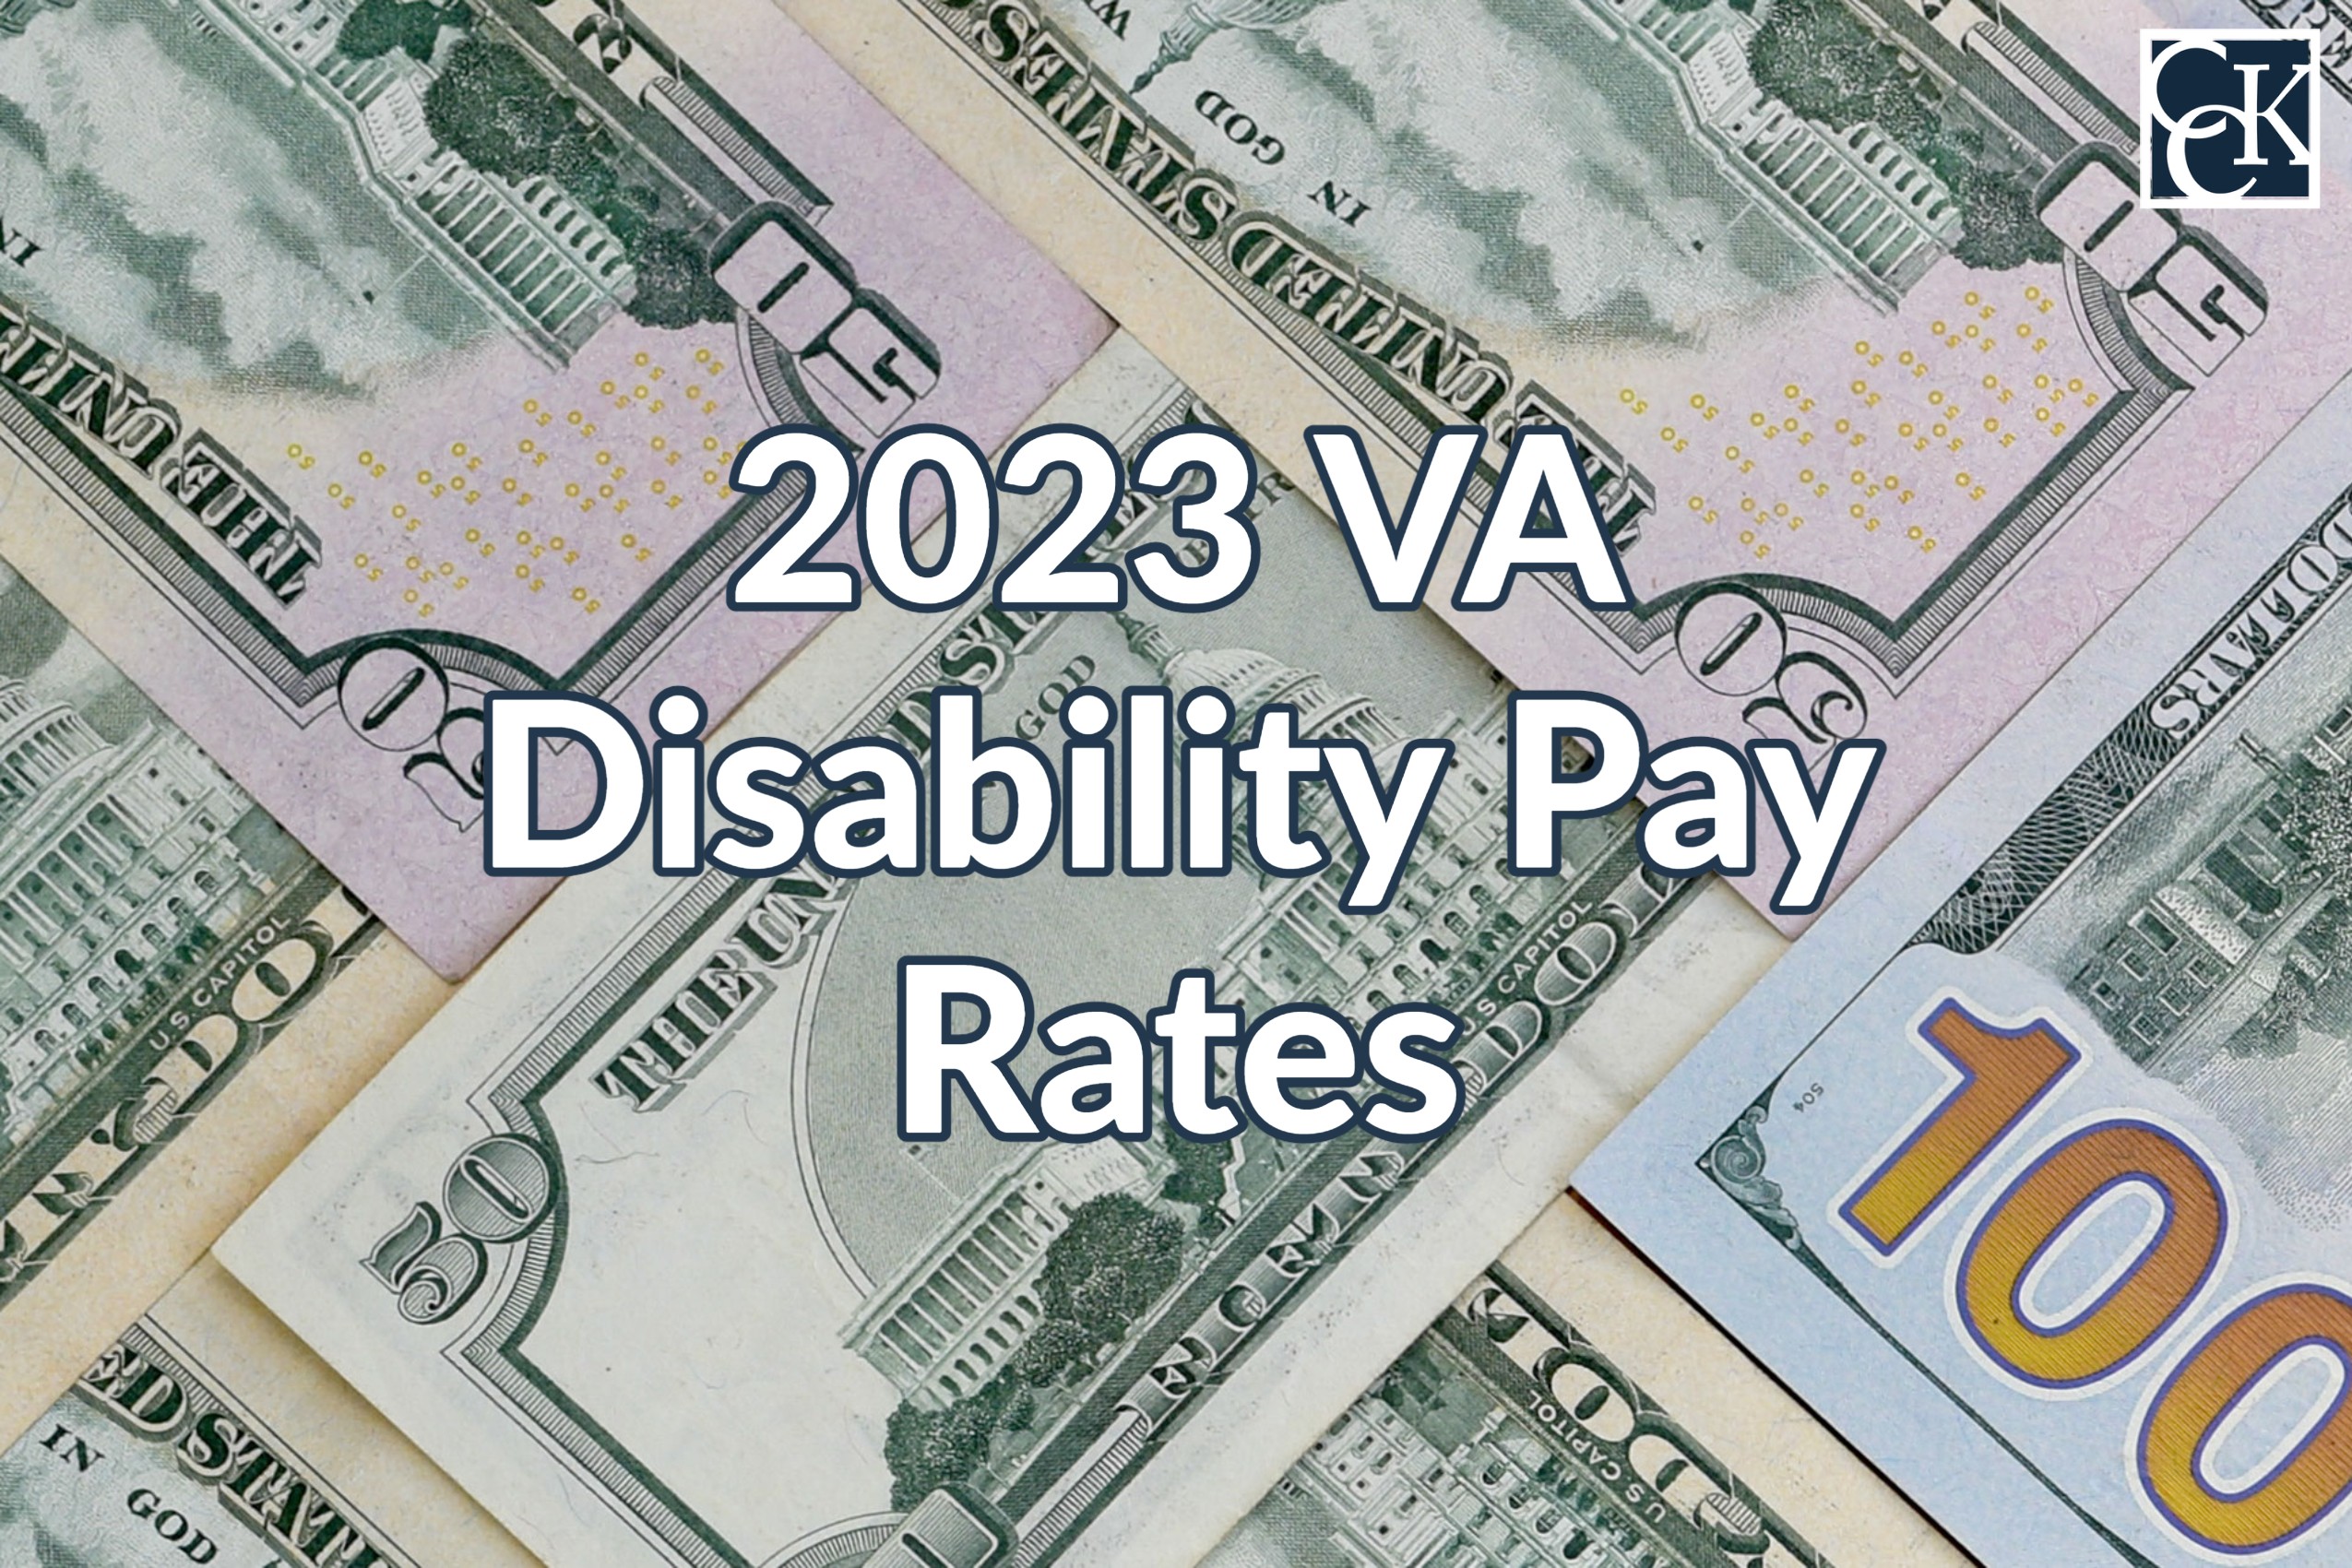 VA Disability Pay Charts For 2023 With Calculator, 49% OFF